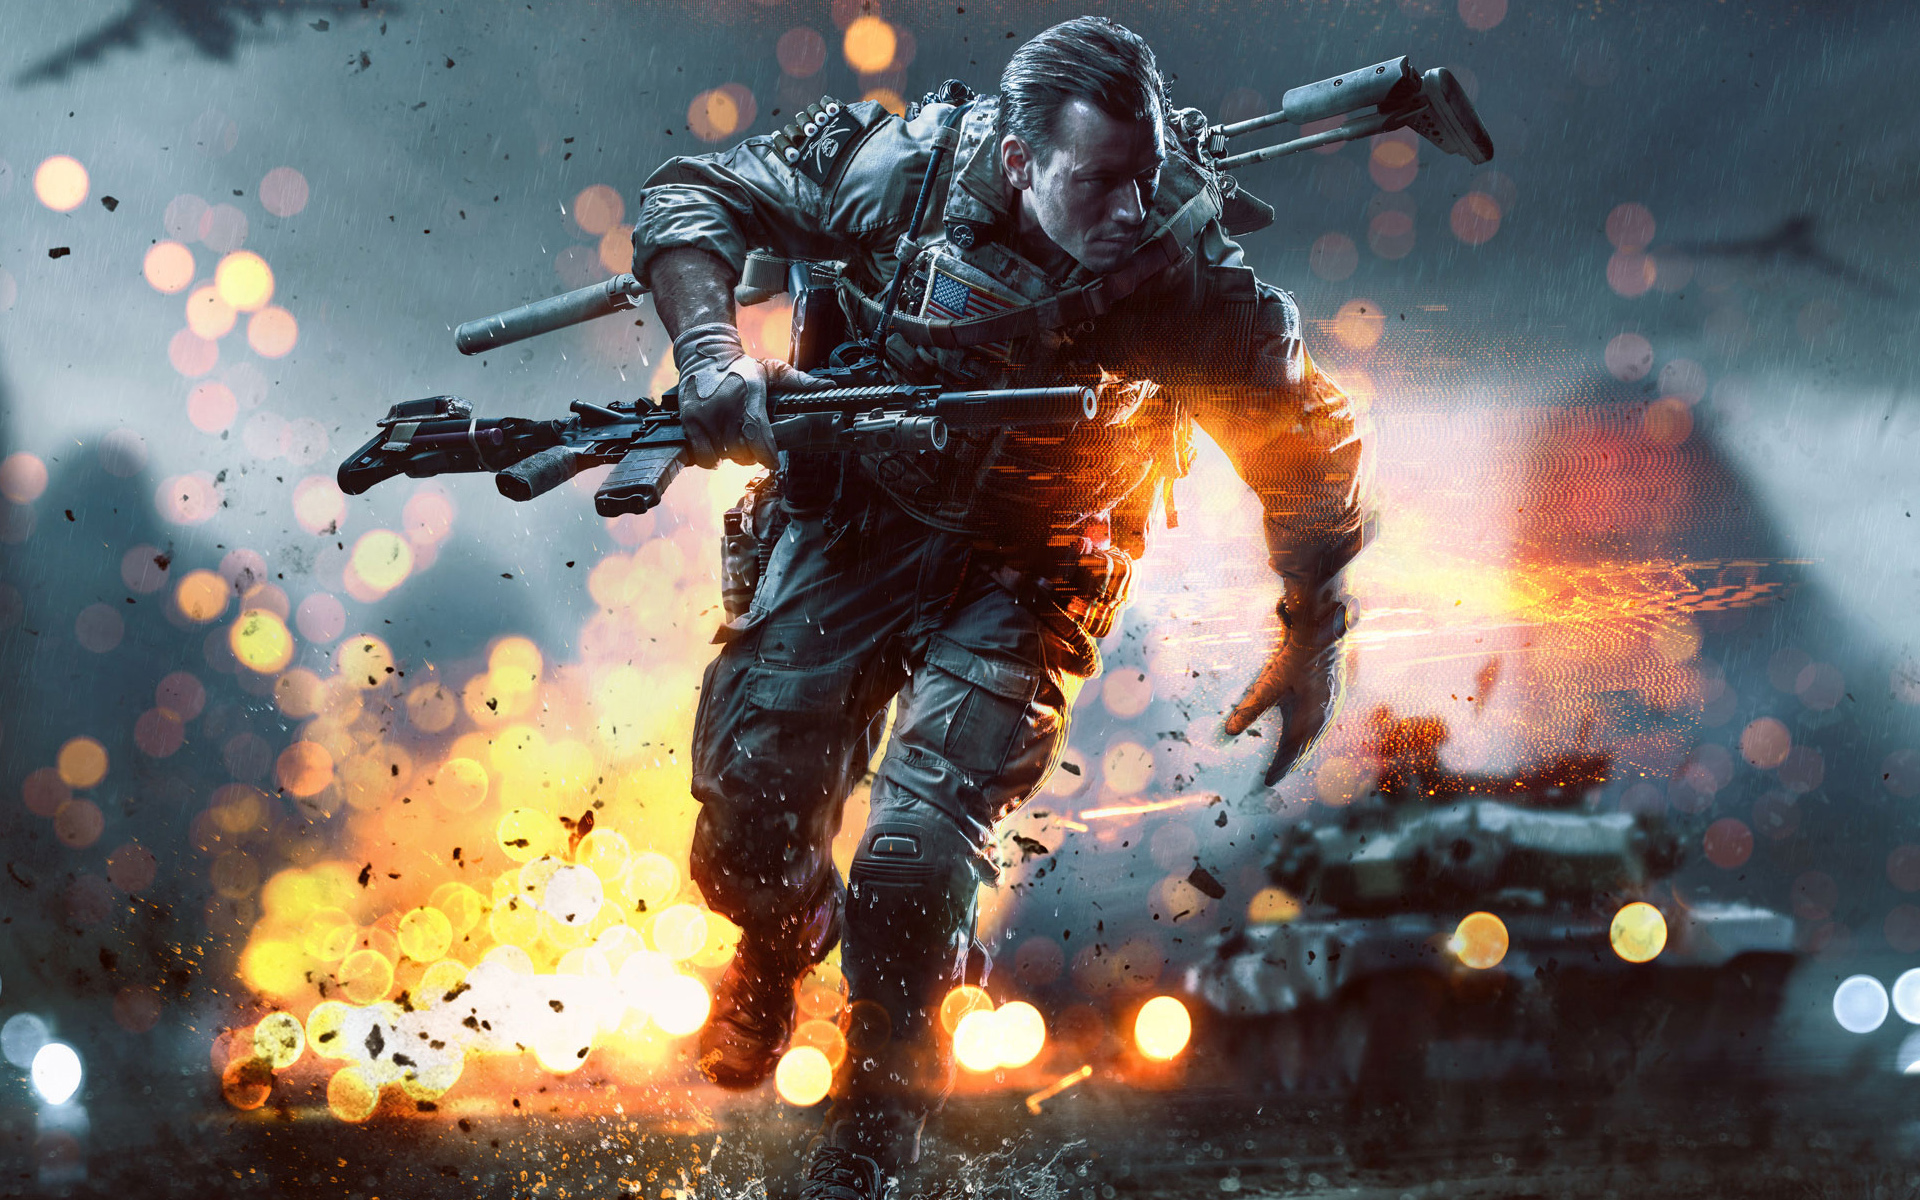 How to trigger Levolution events in Battlefield 4